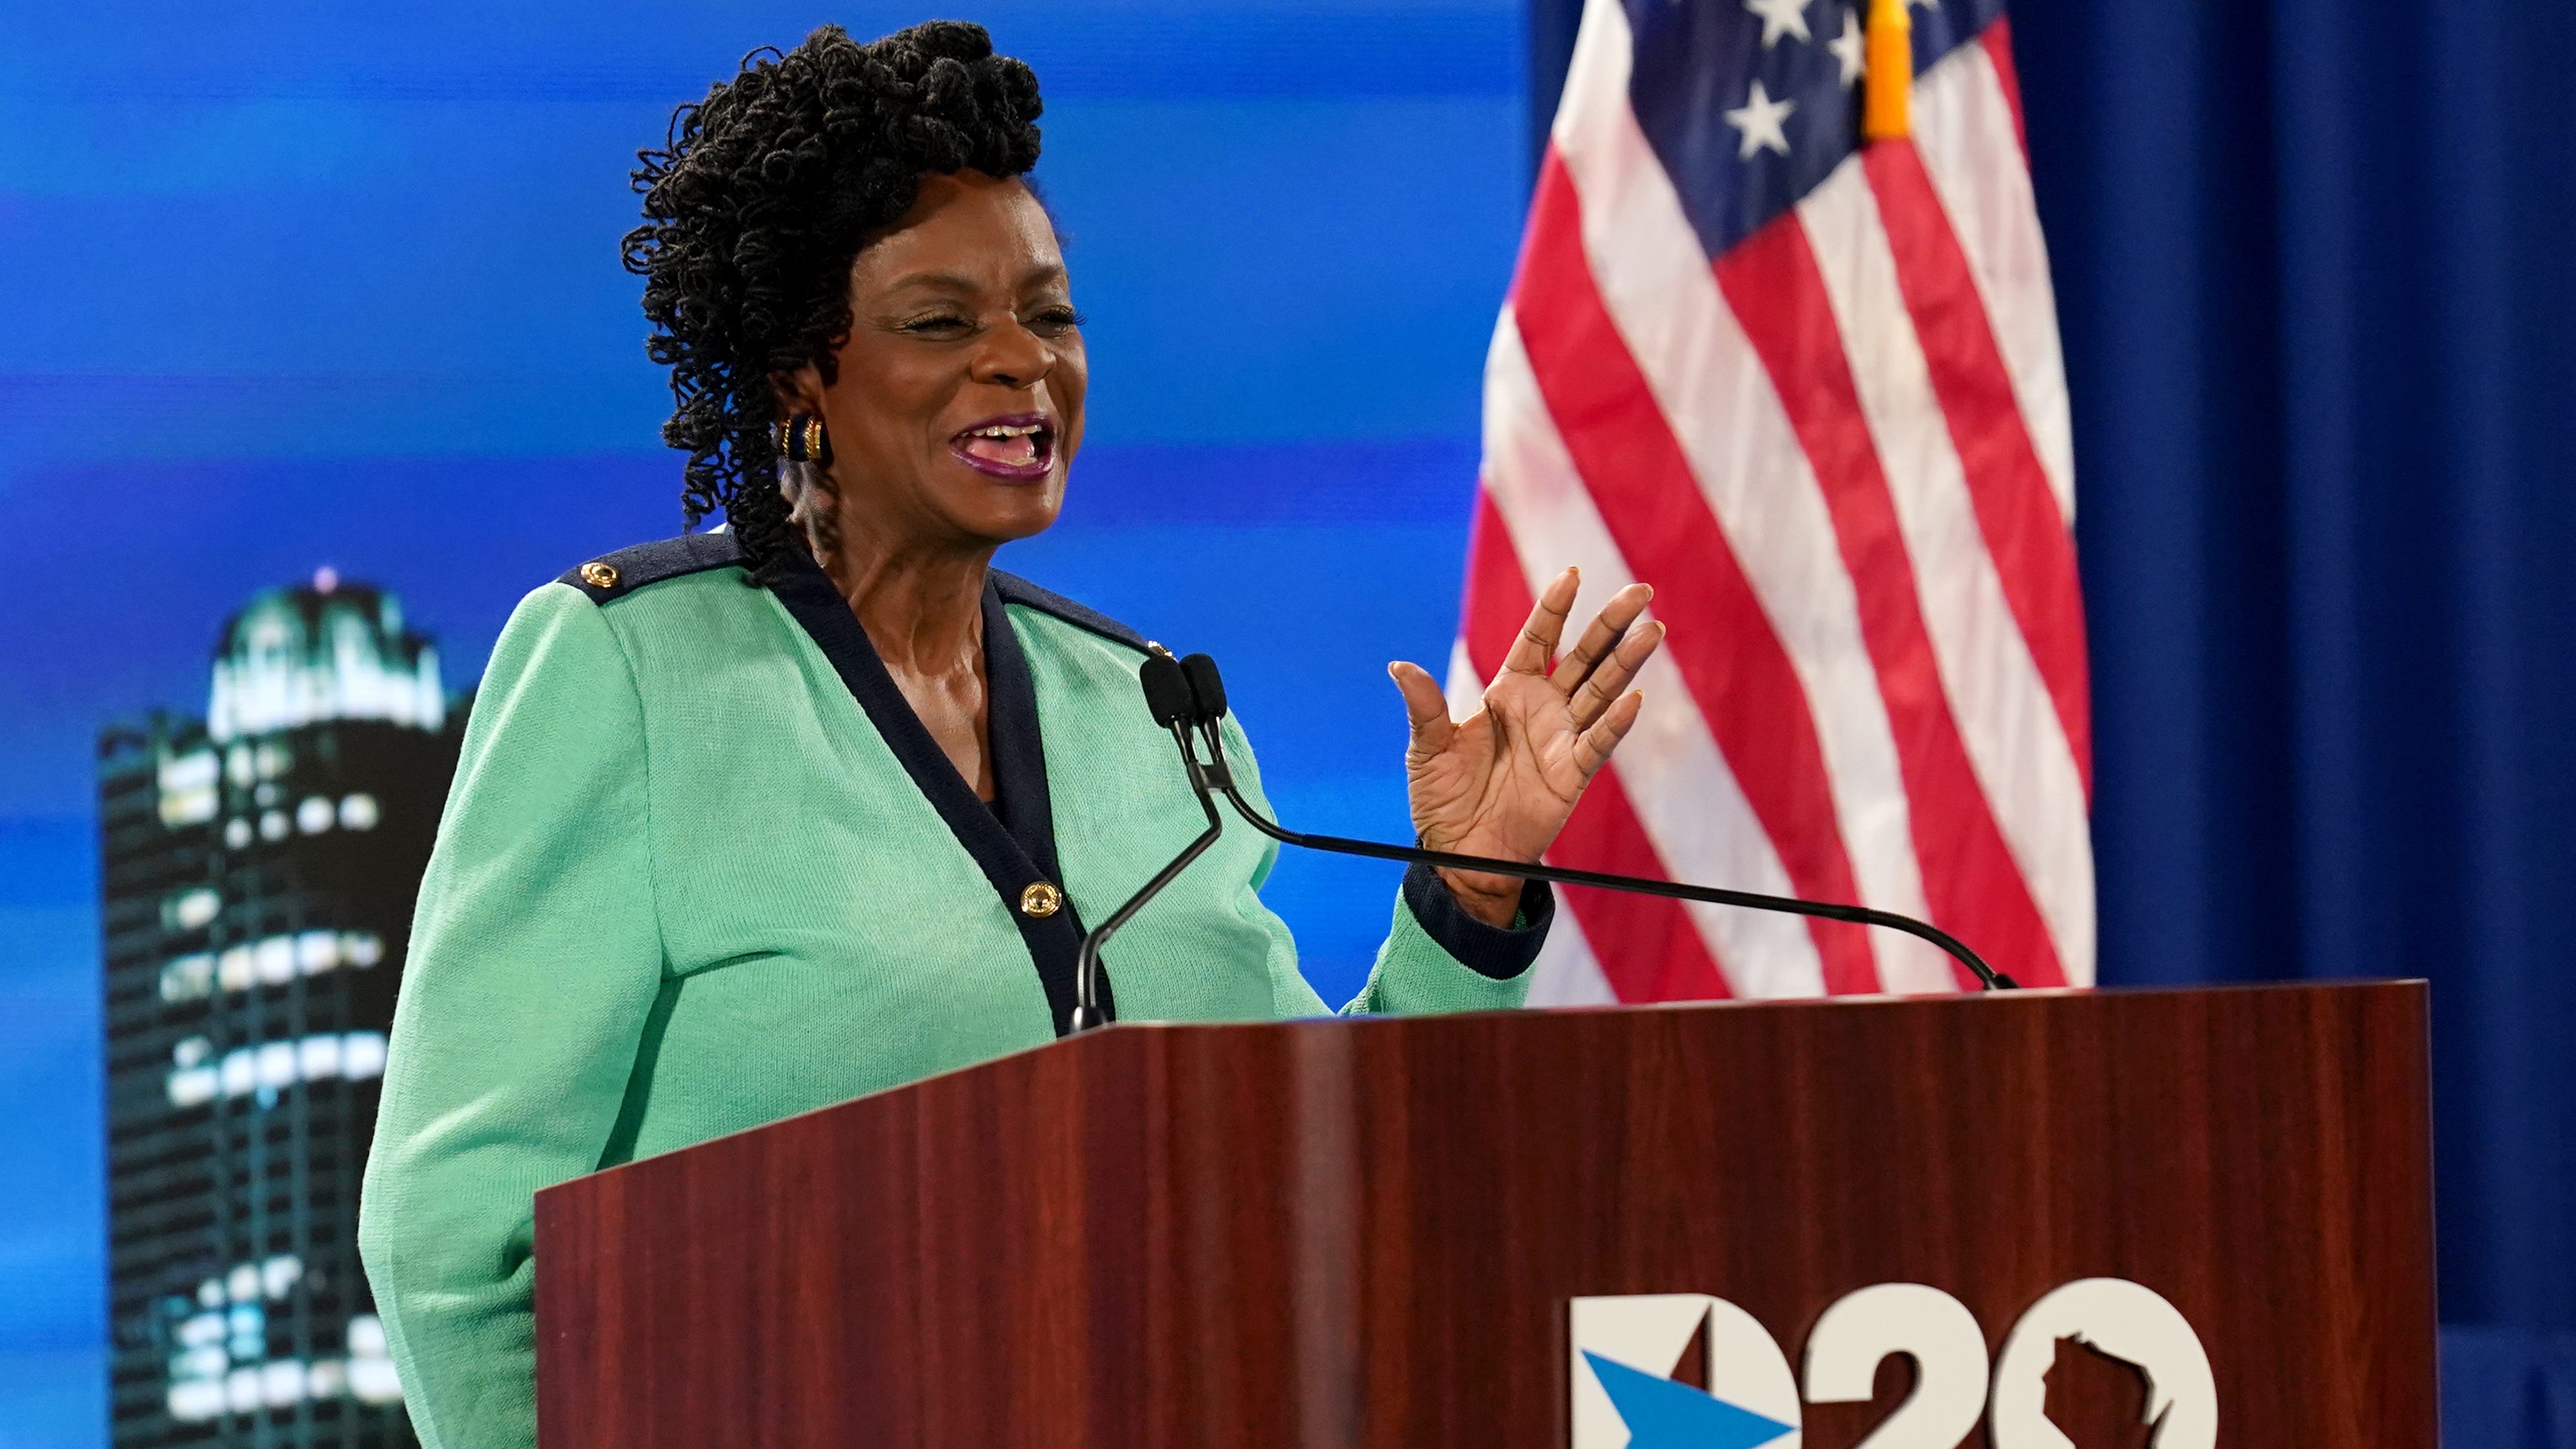 U.S. Rep. Gwen Moore (D-Wis.) speaks at the start of the Democratic National Convention at the Wisconsin Center on Monday. Moore spoke from a second-floor conference room, which was turned into a studio to kick off a mostly virtual convention due to the COVID-19 pandemic.